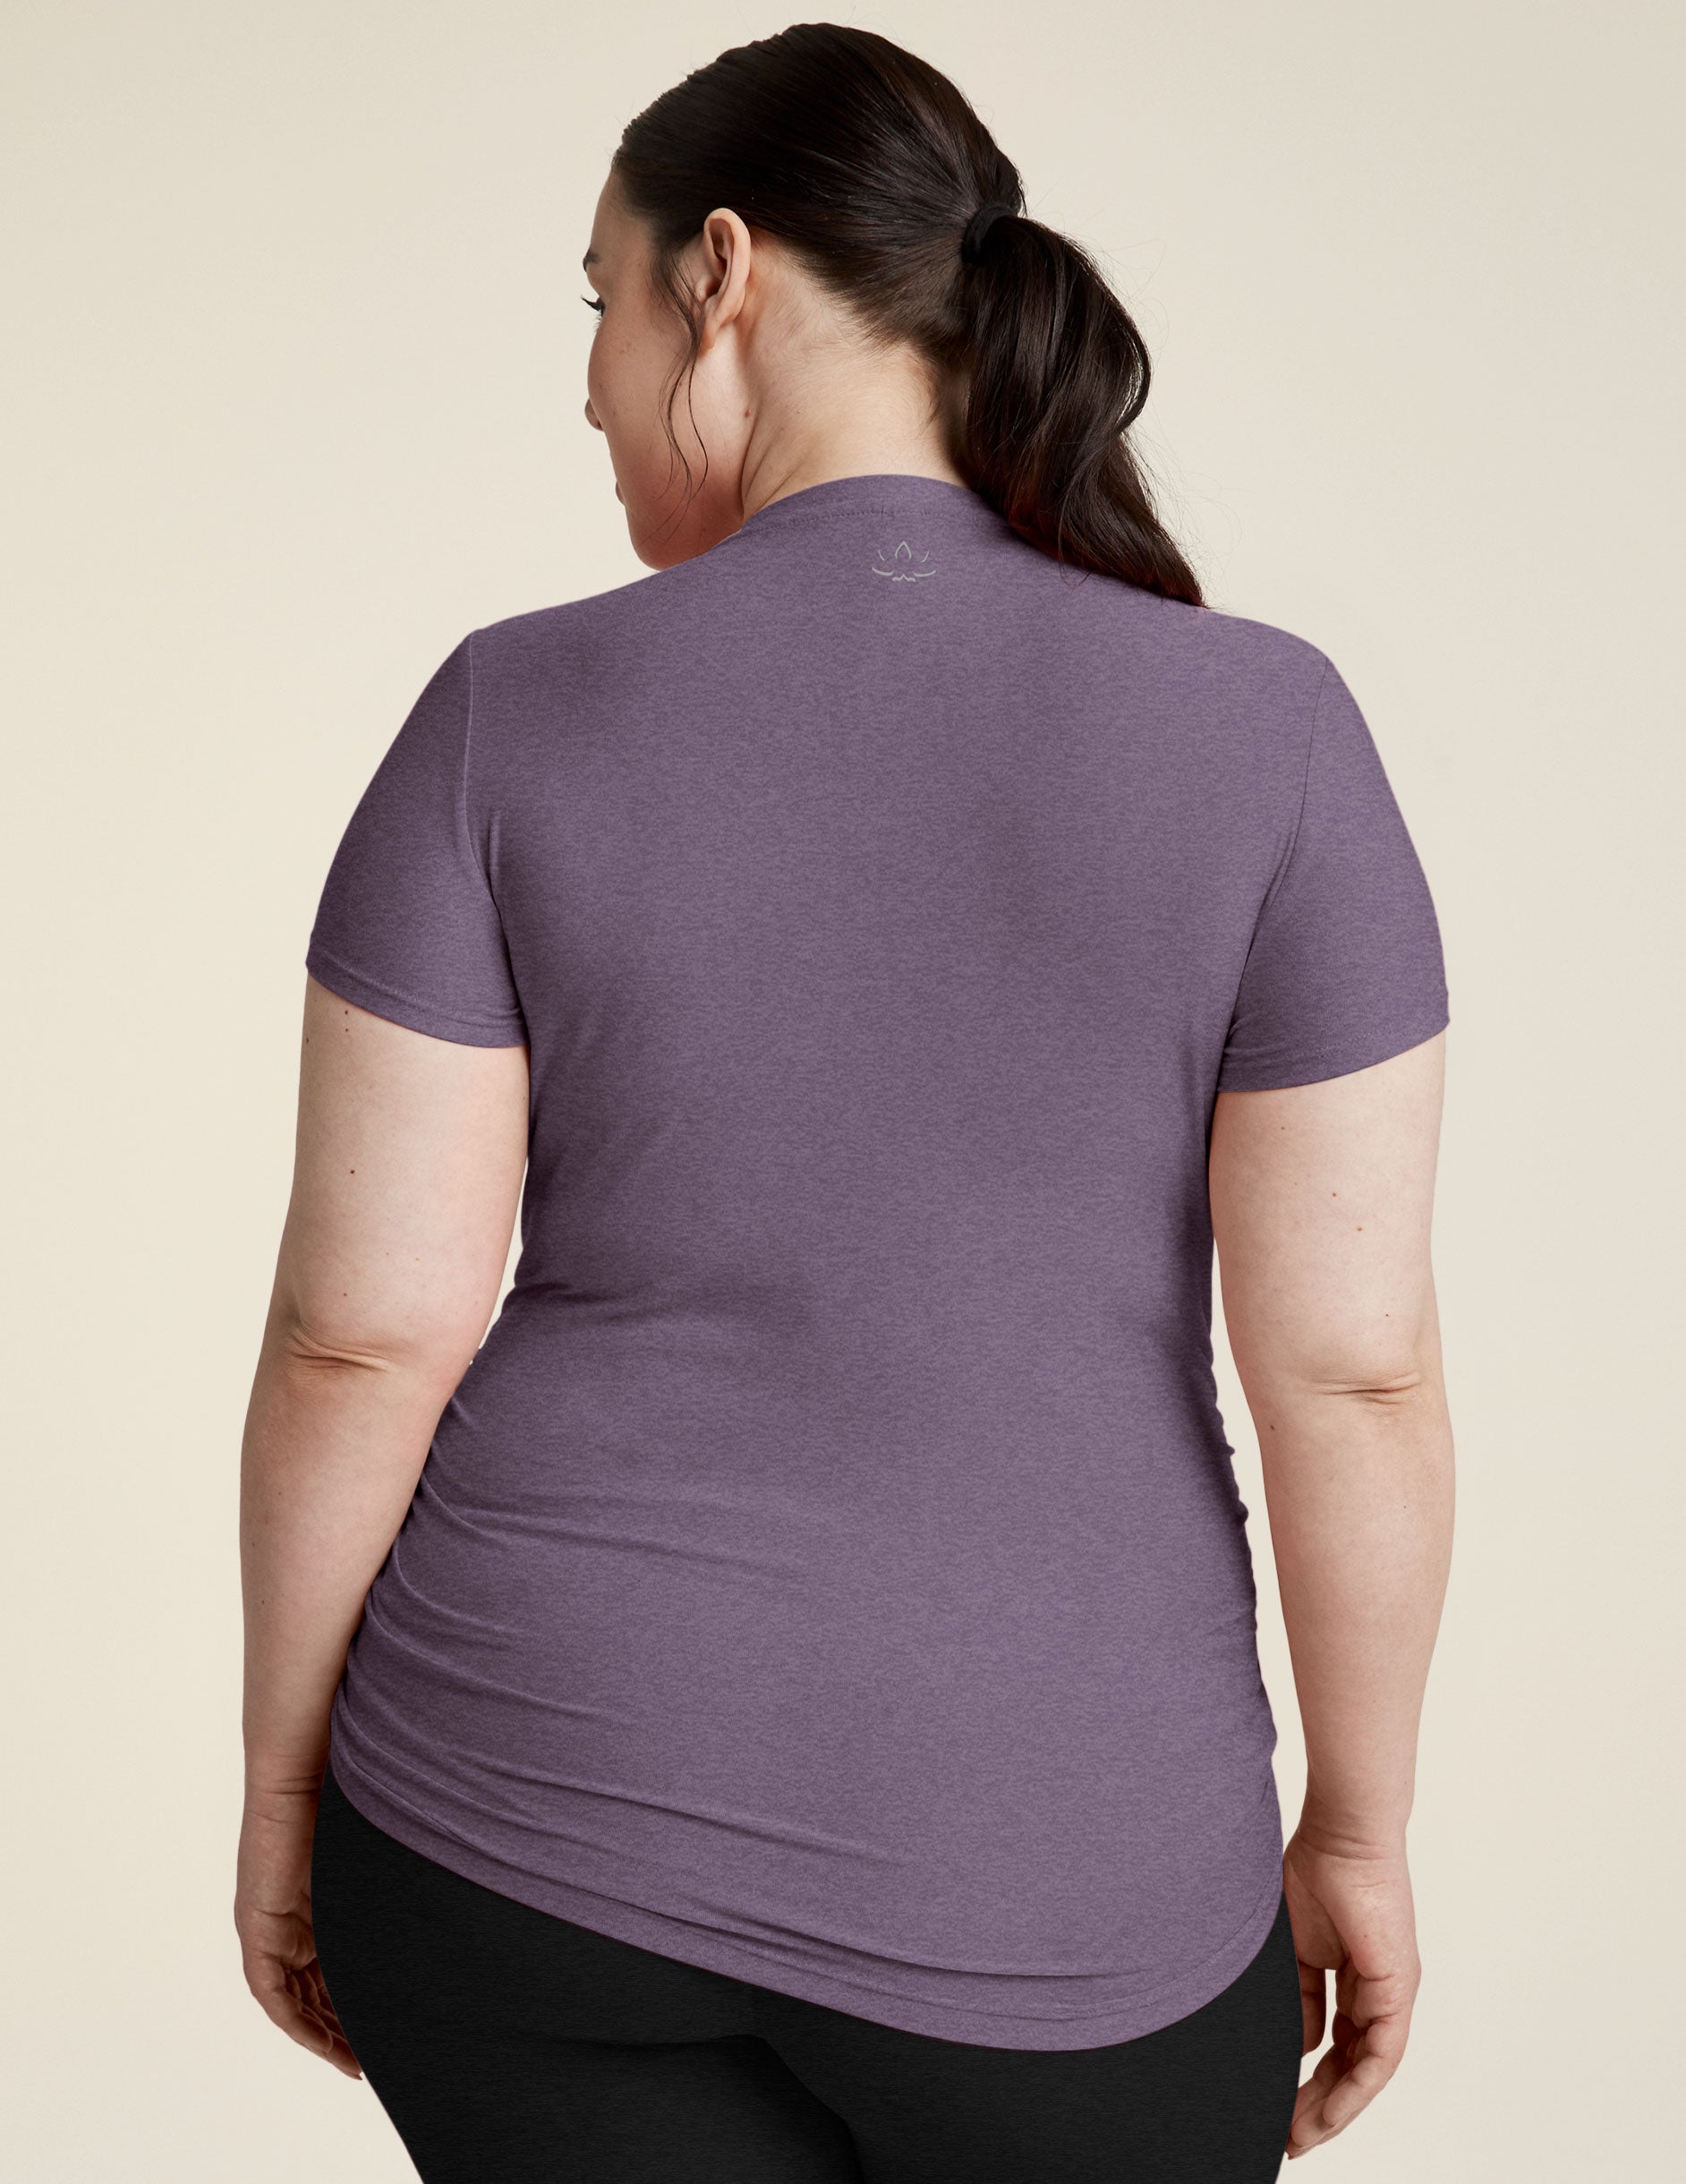 Featherweight One & Only Maternity Tee Image 3